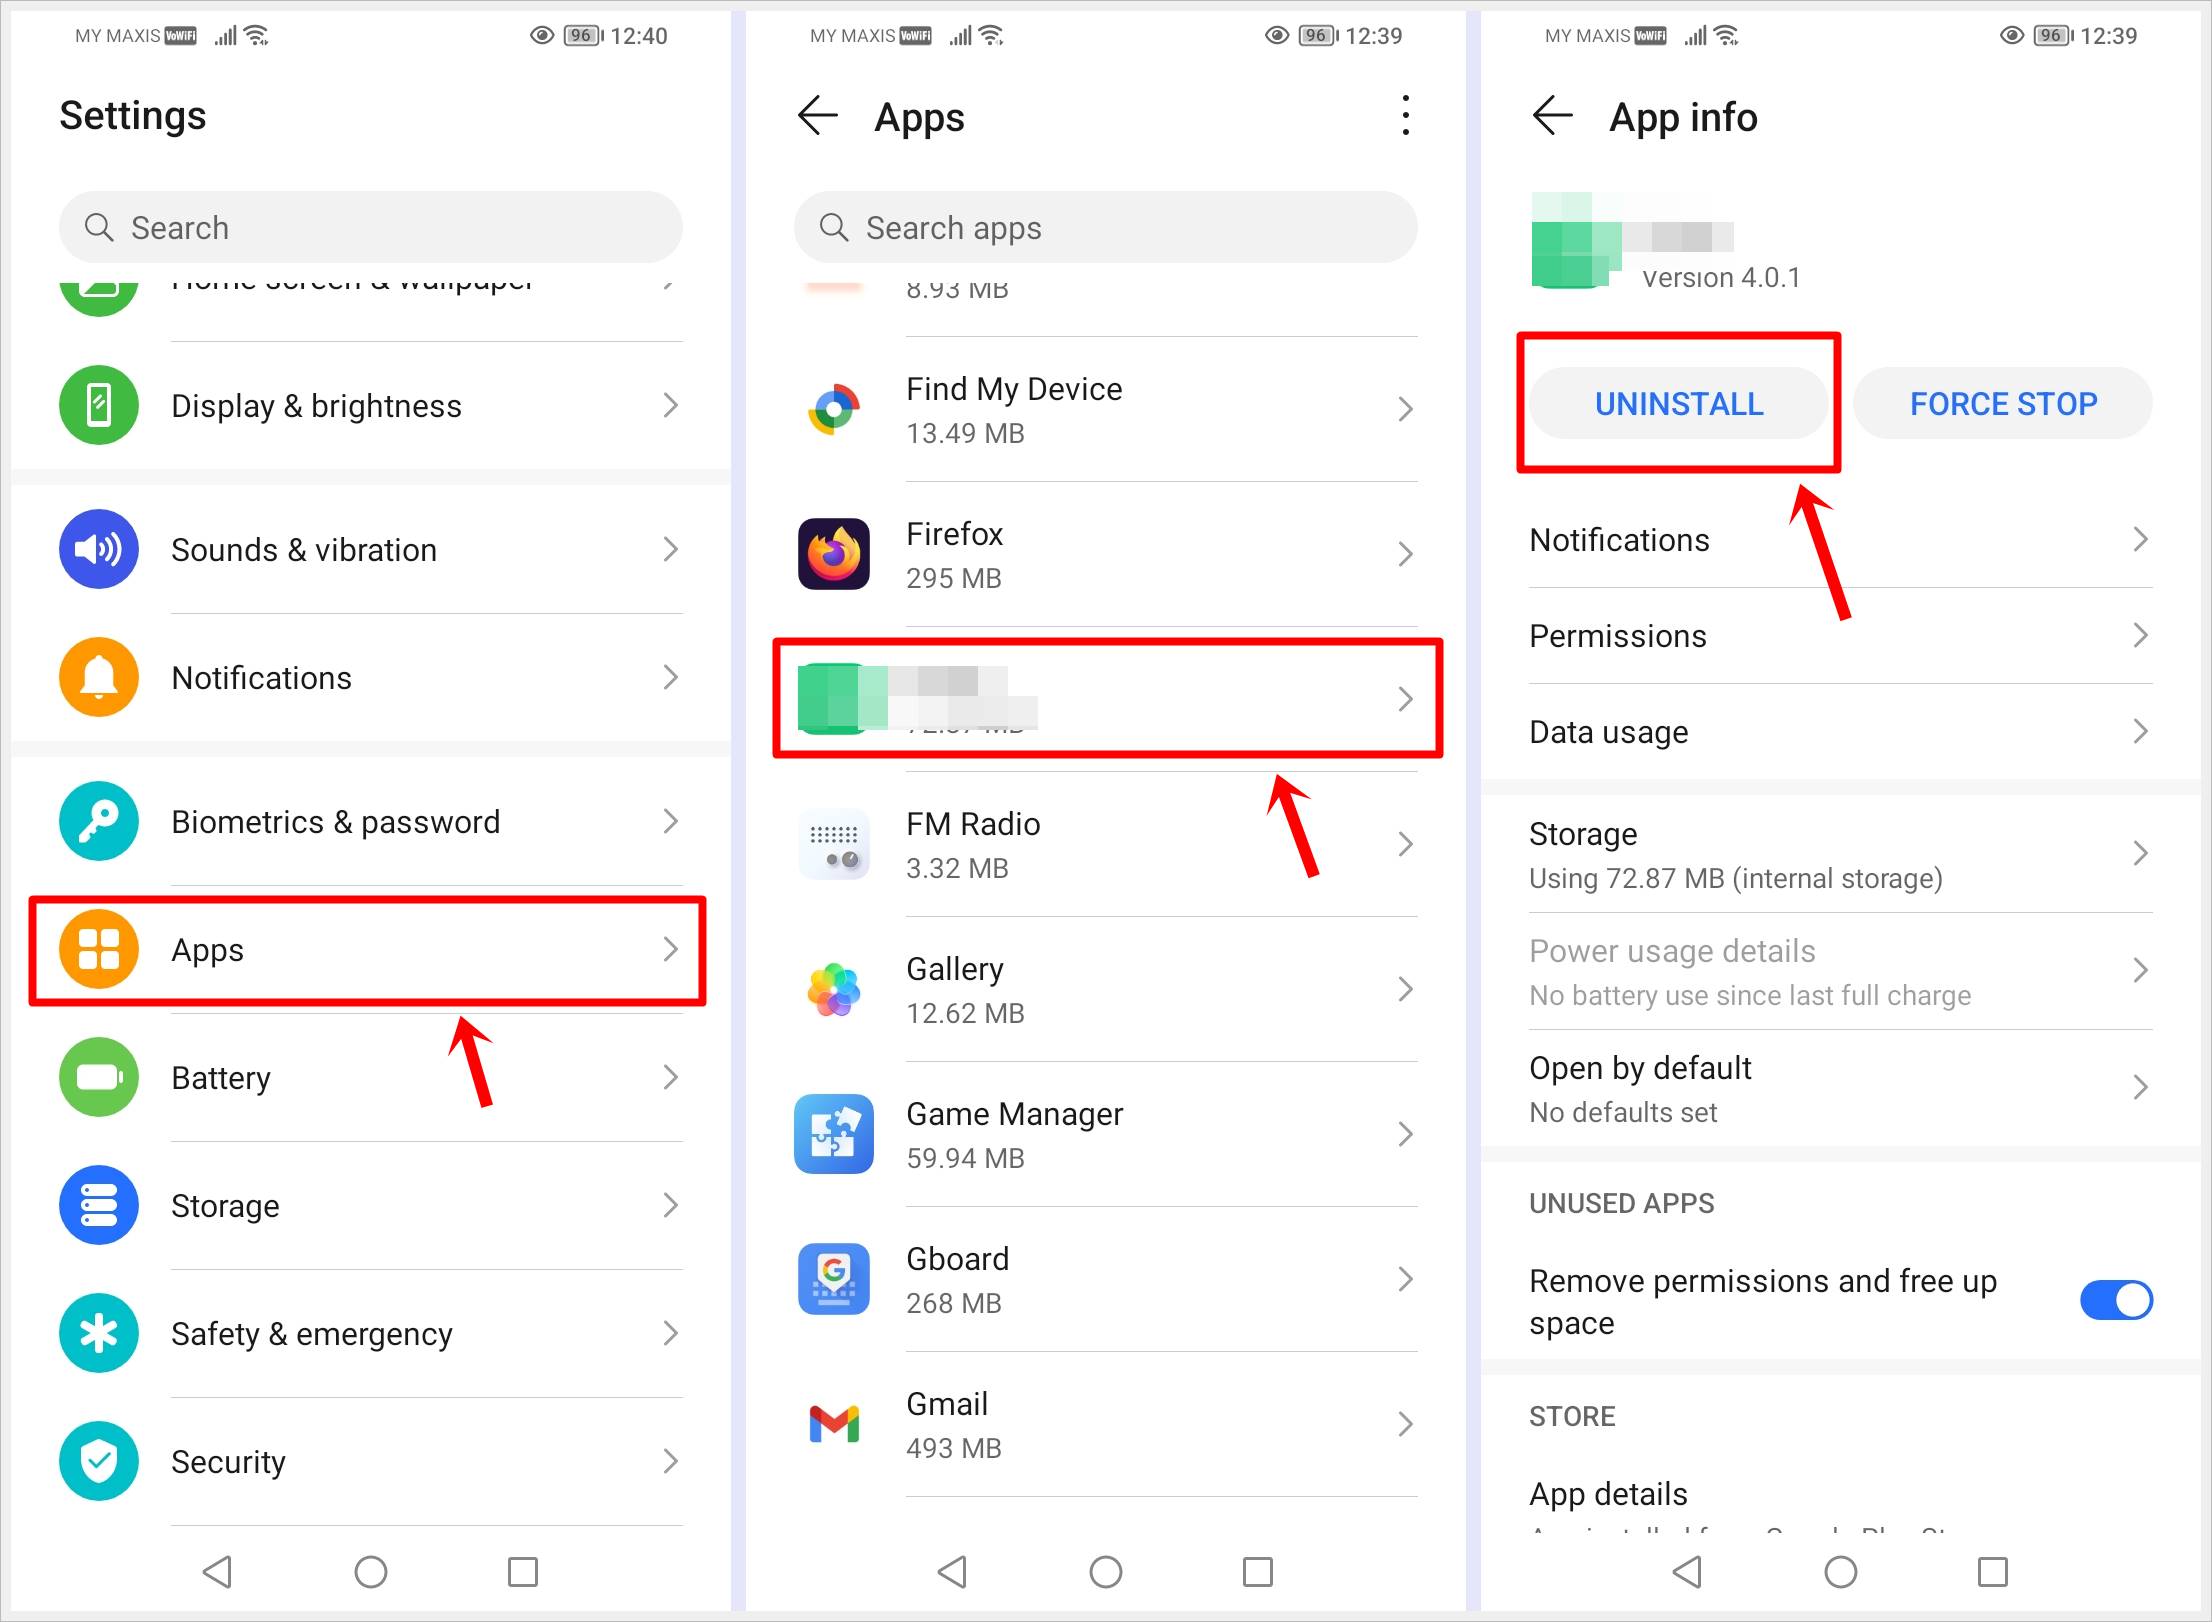 Identify and Uninstall Apps in Safe Mode to Fix an Android Phone That Keeps Restarting: This image displays three screenshots of an Android phone: the first is the 'Settings' page with the 'Apps' option highlighted, the second is the 'Apps' page with one of the installed apps highlighted, and the third is the 'App Info' page with the 'Uninstall' button highlighted.